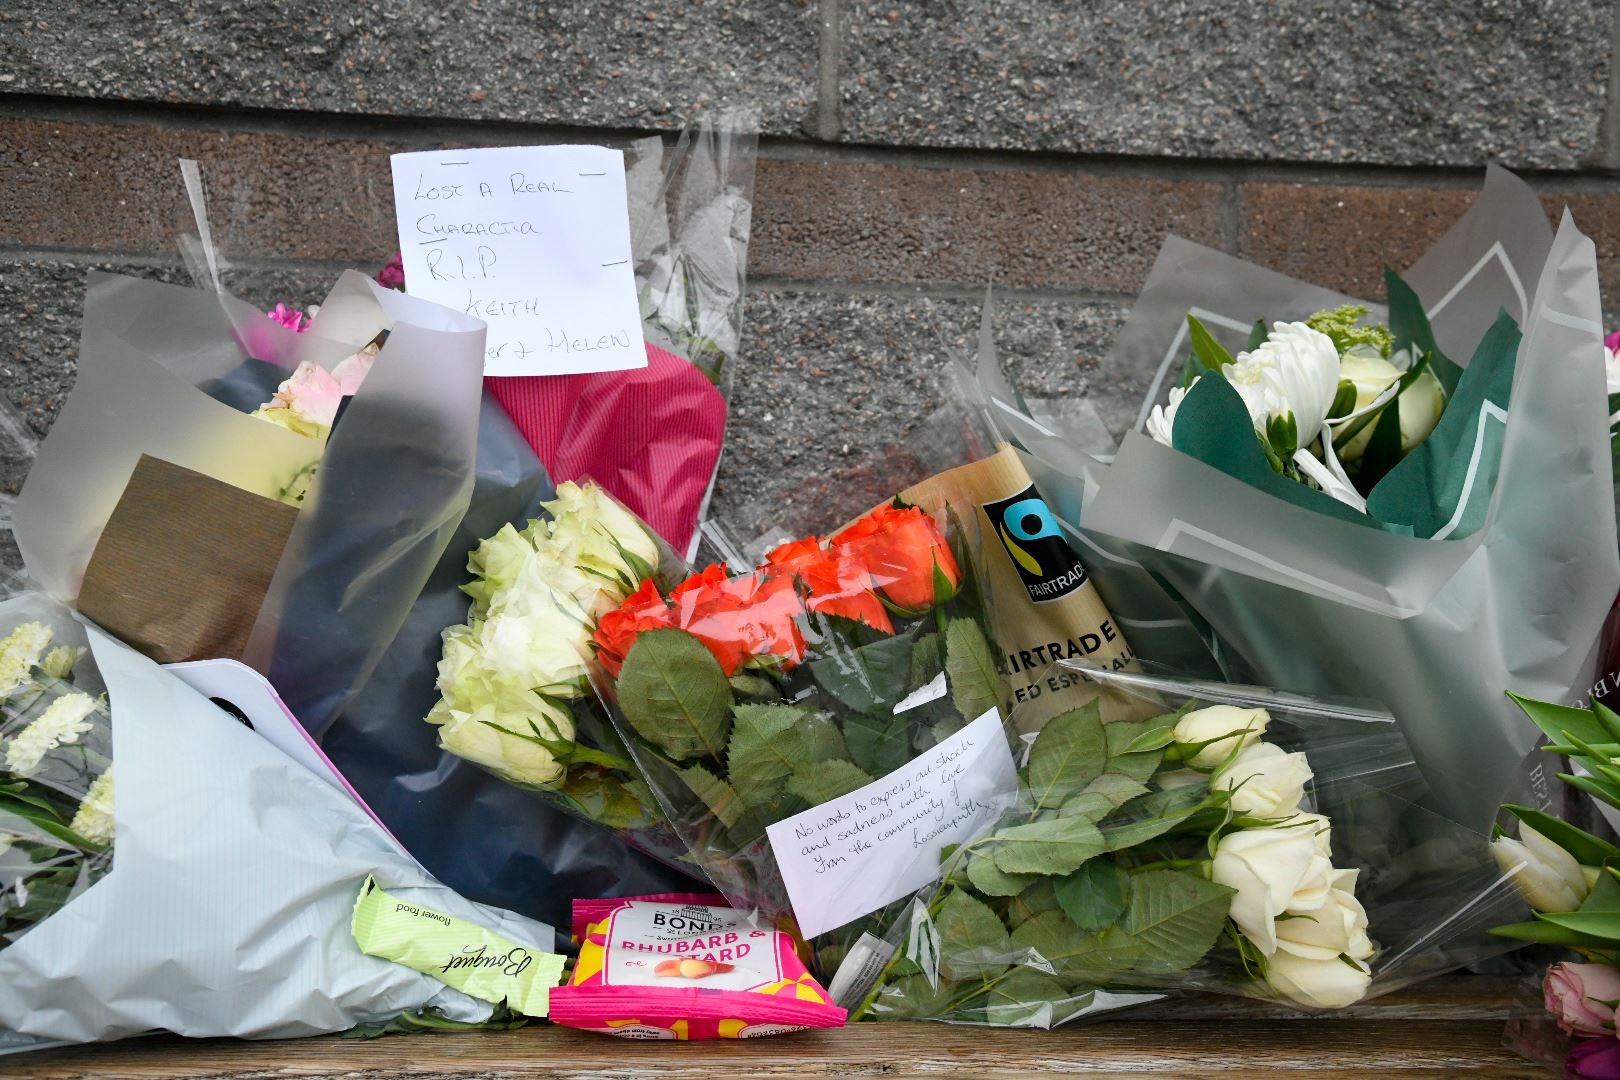 Tributes have been paid to Keith Rollinson at Elgin Bus Station. Picture: Beth Taylor